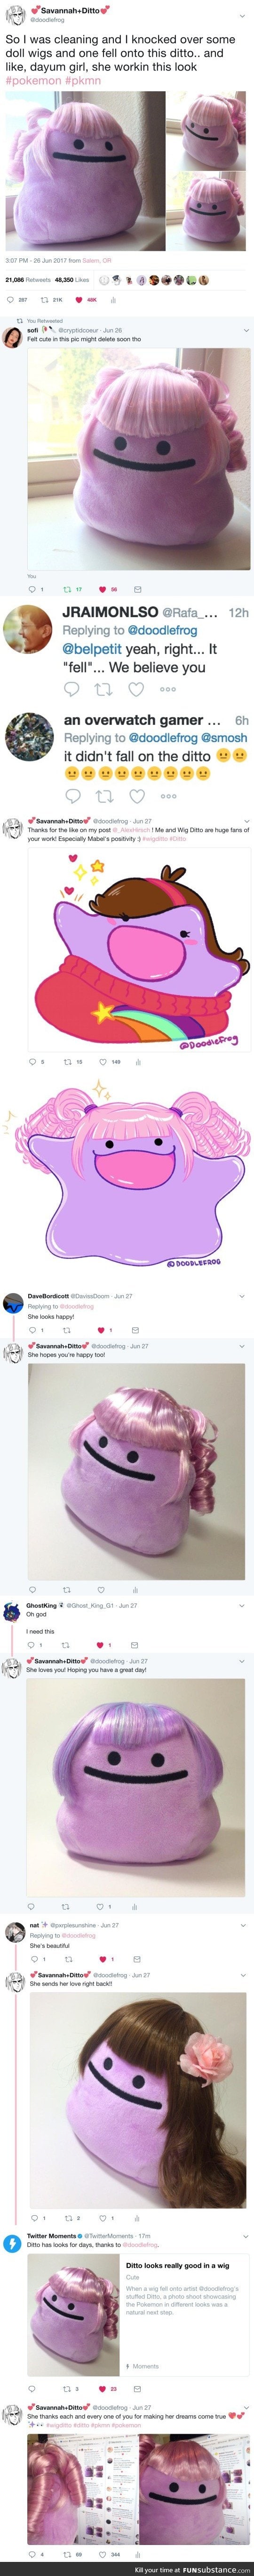 Ditto with beautiful hair